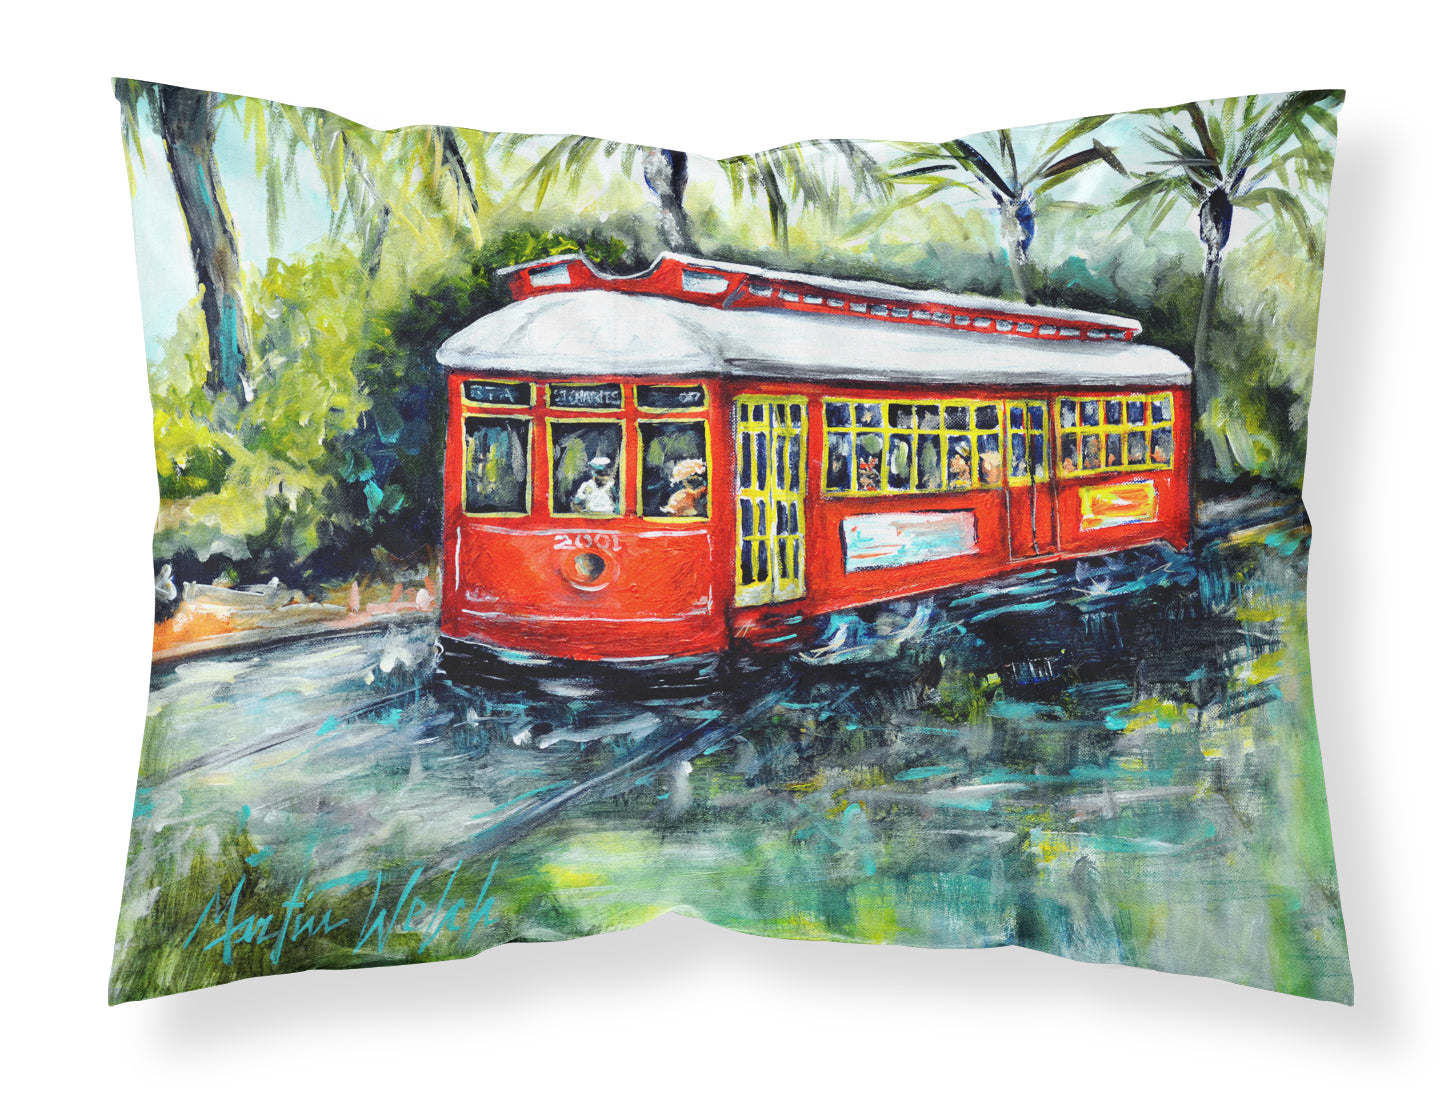 Buy this Little Red Street Car Fabric Standard Pillowcase